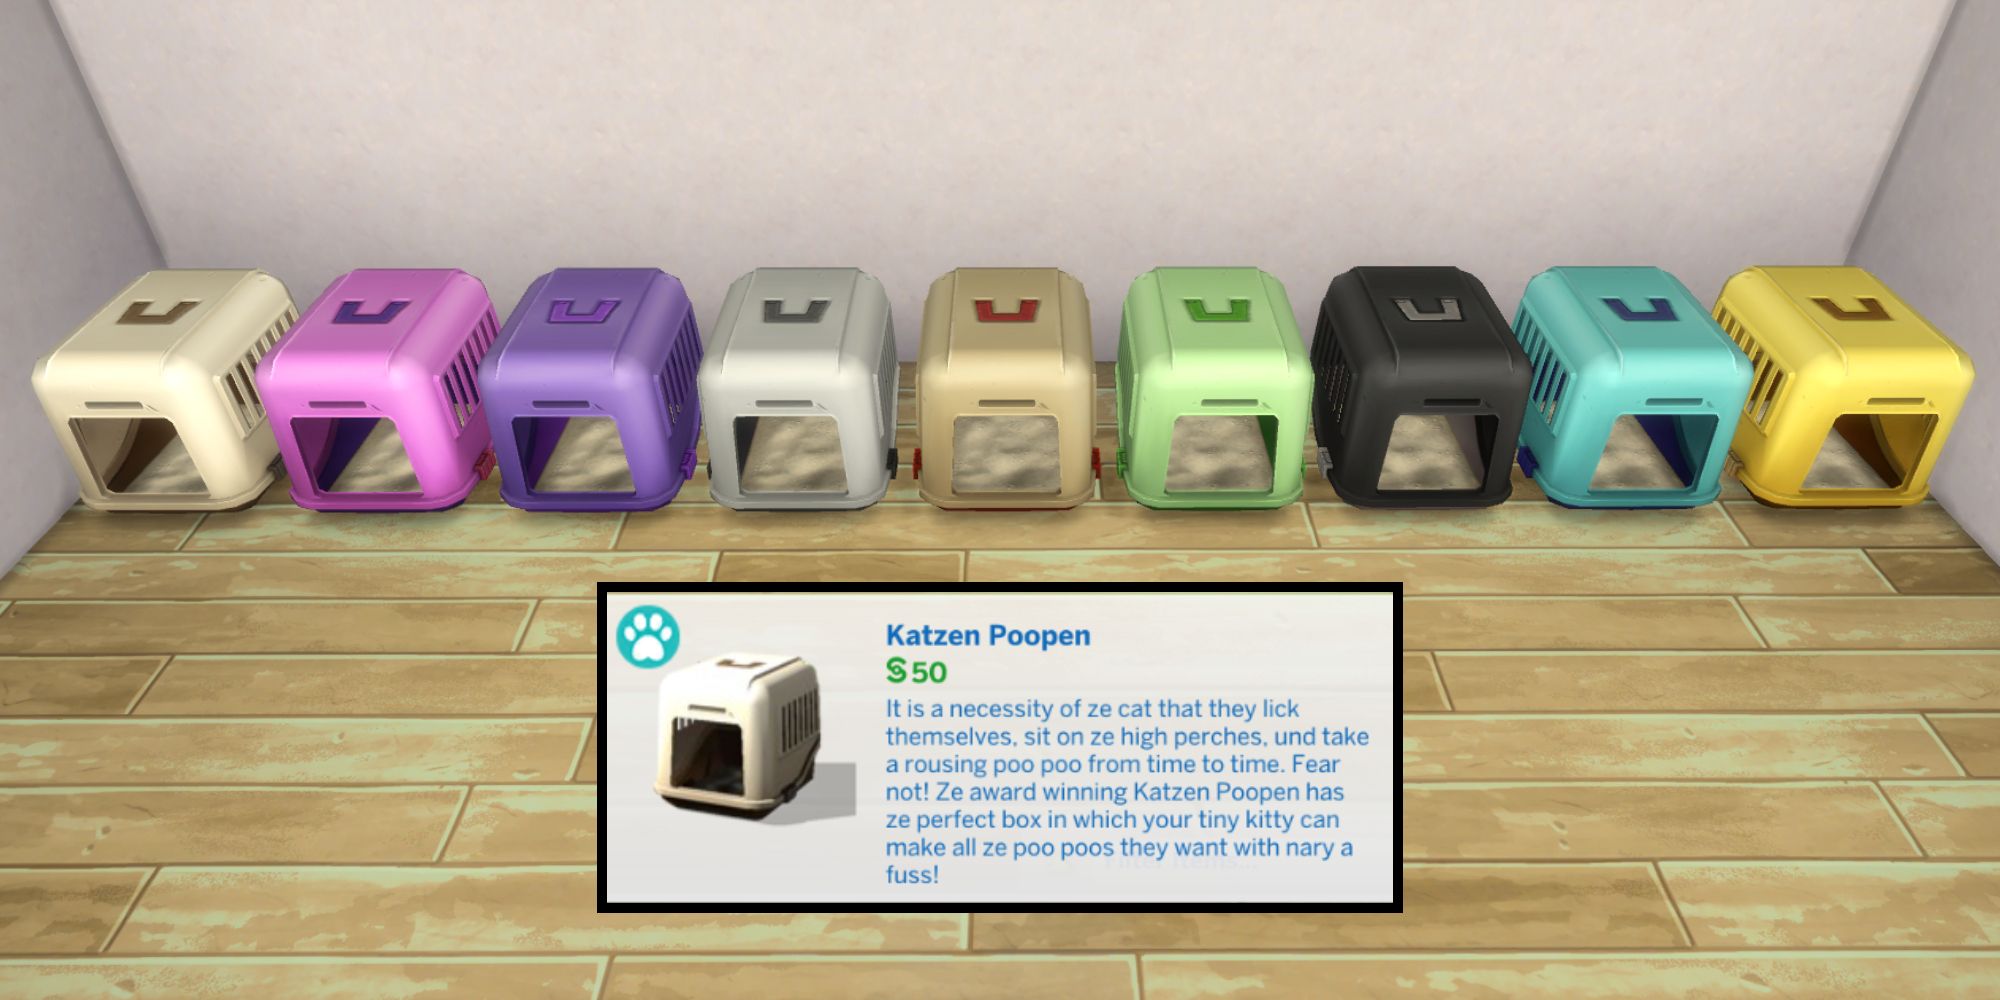 The Katzen Poopen is a litterbox and has a funny description in build/buy mode